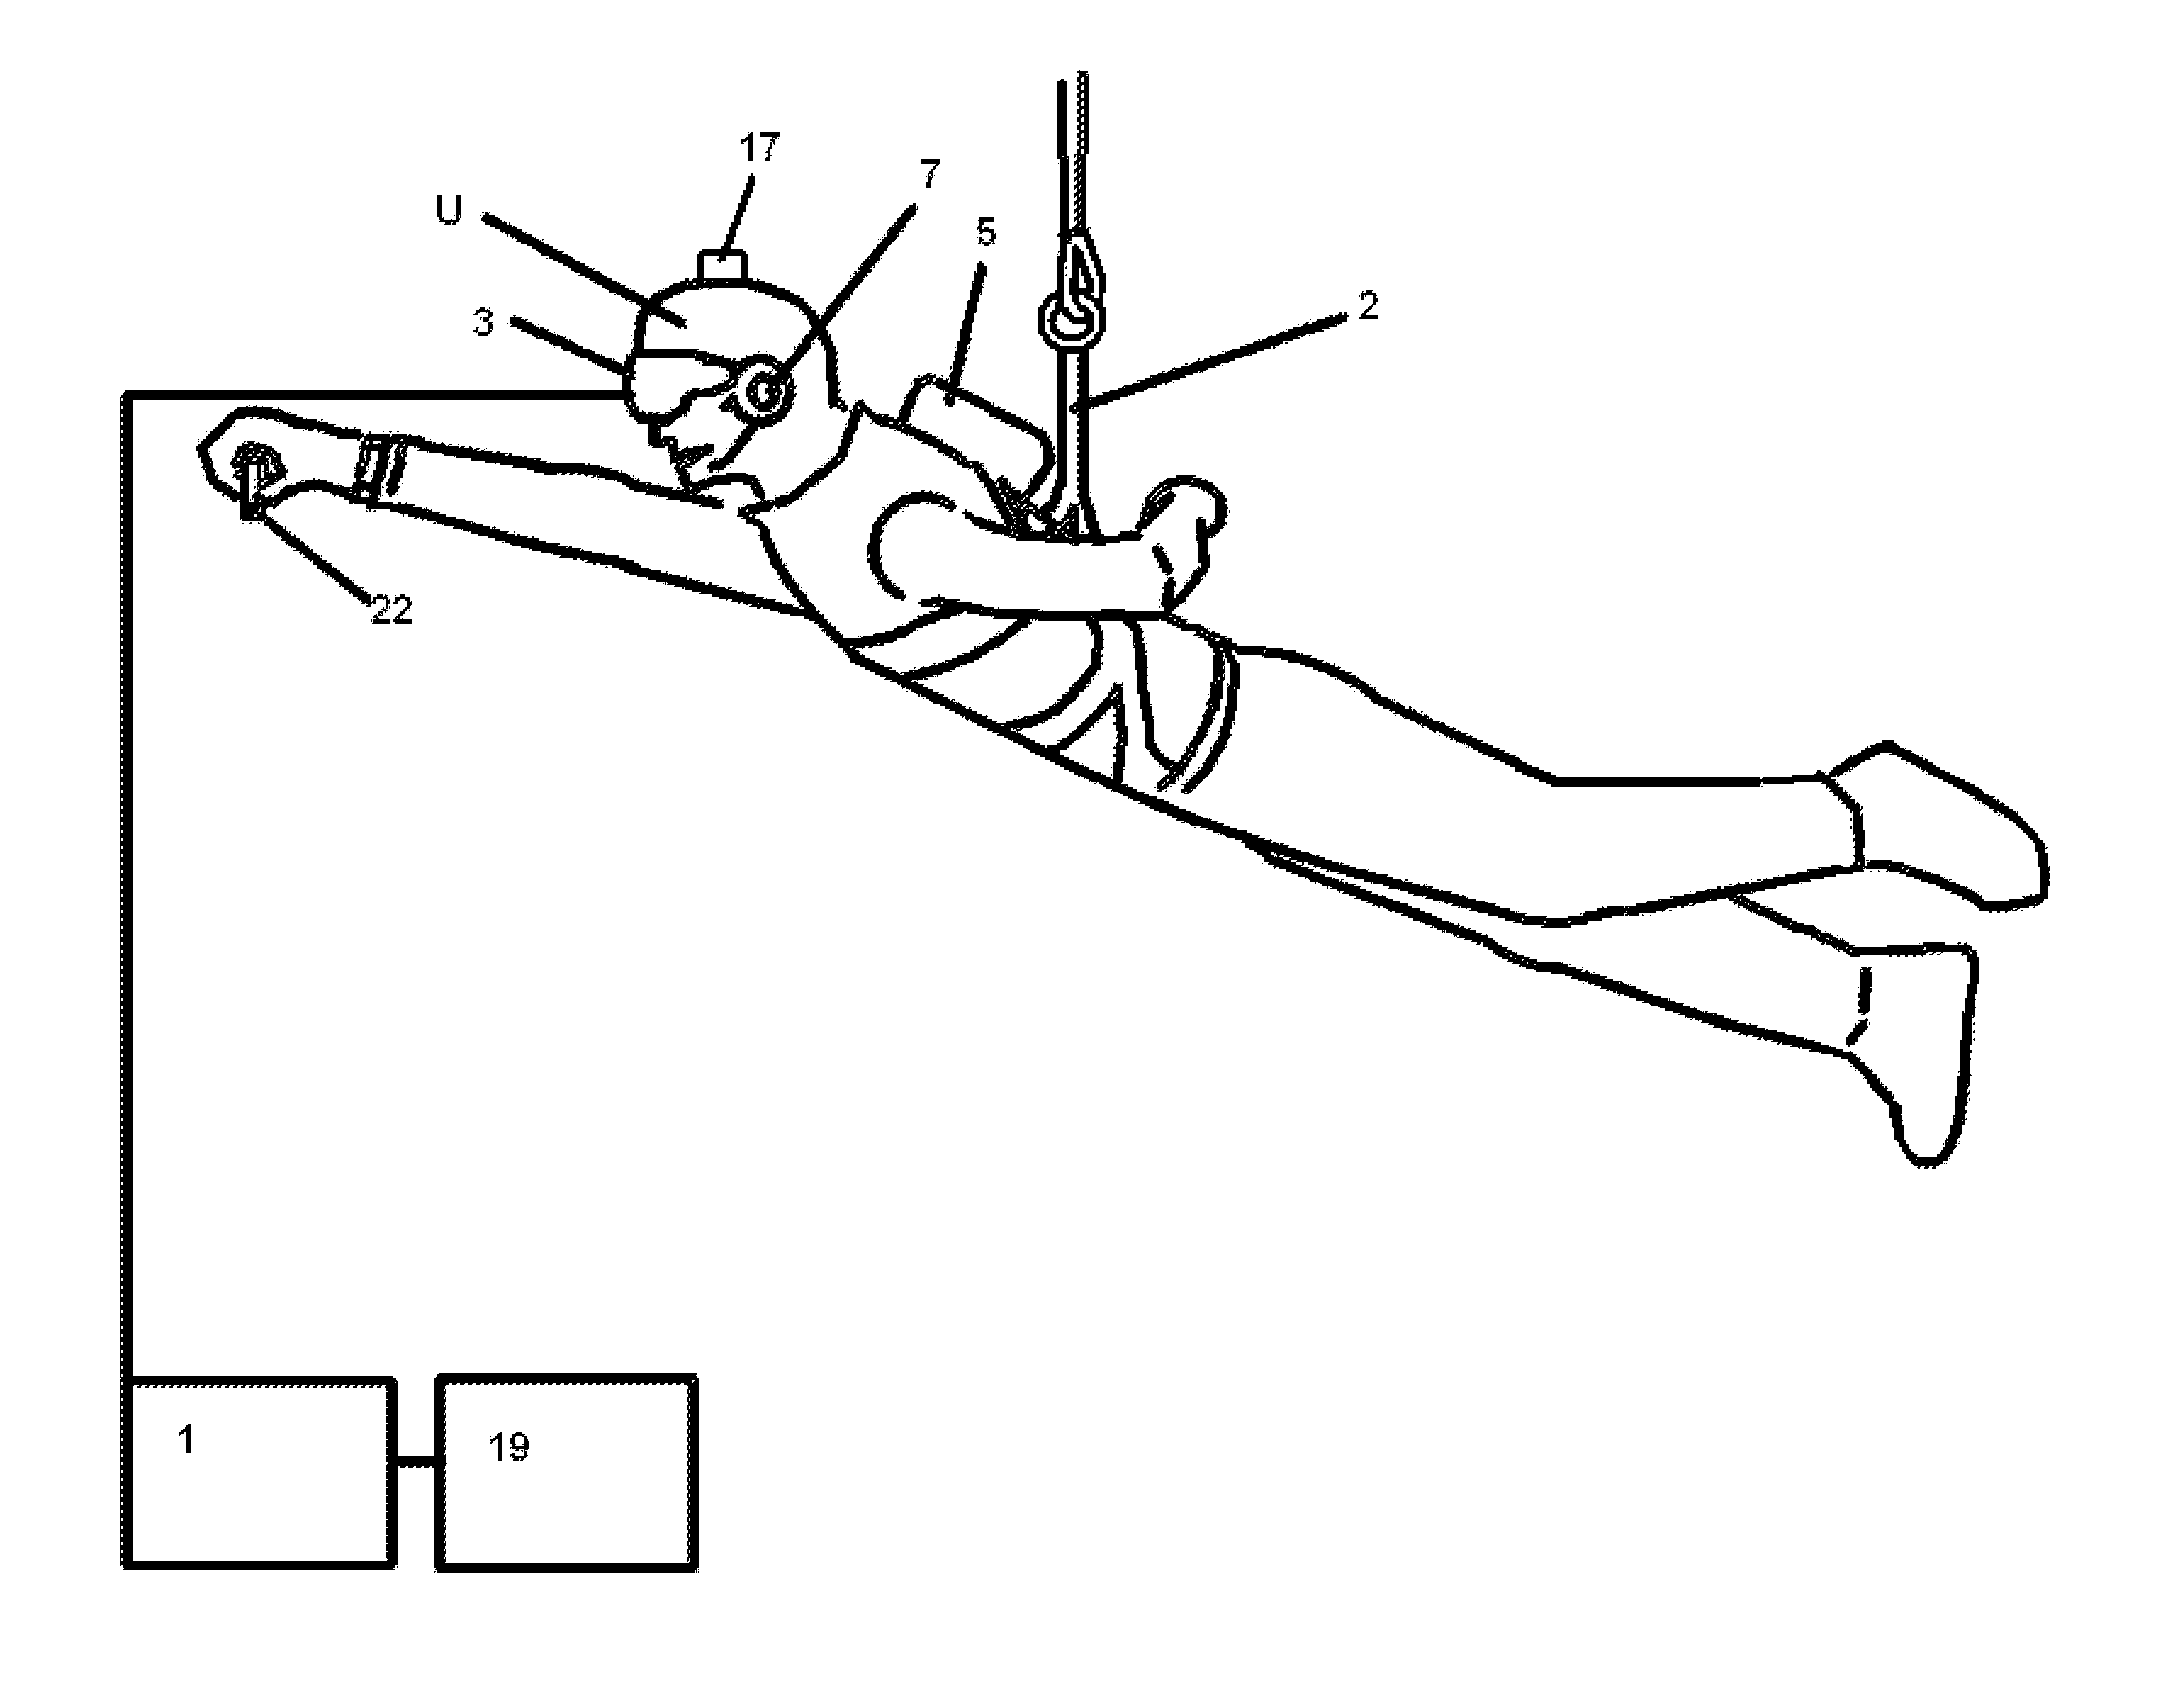 Methods and apparatus to provide user a somatosensory experience for thrill seeking jumping like activities